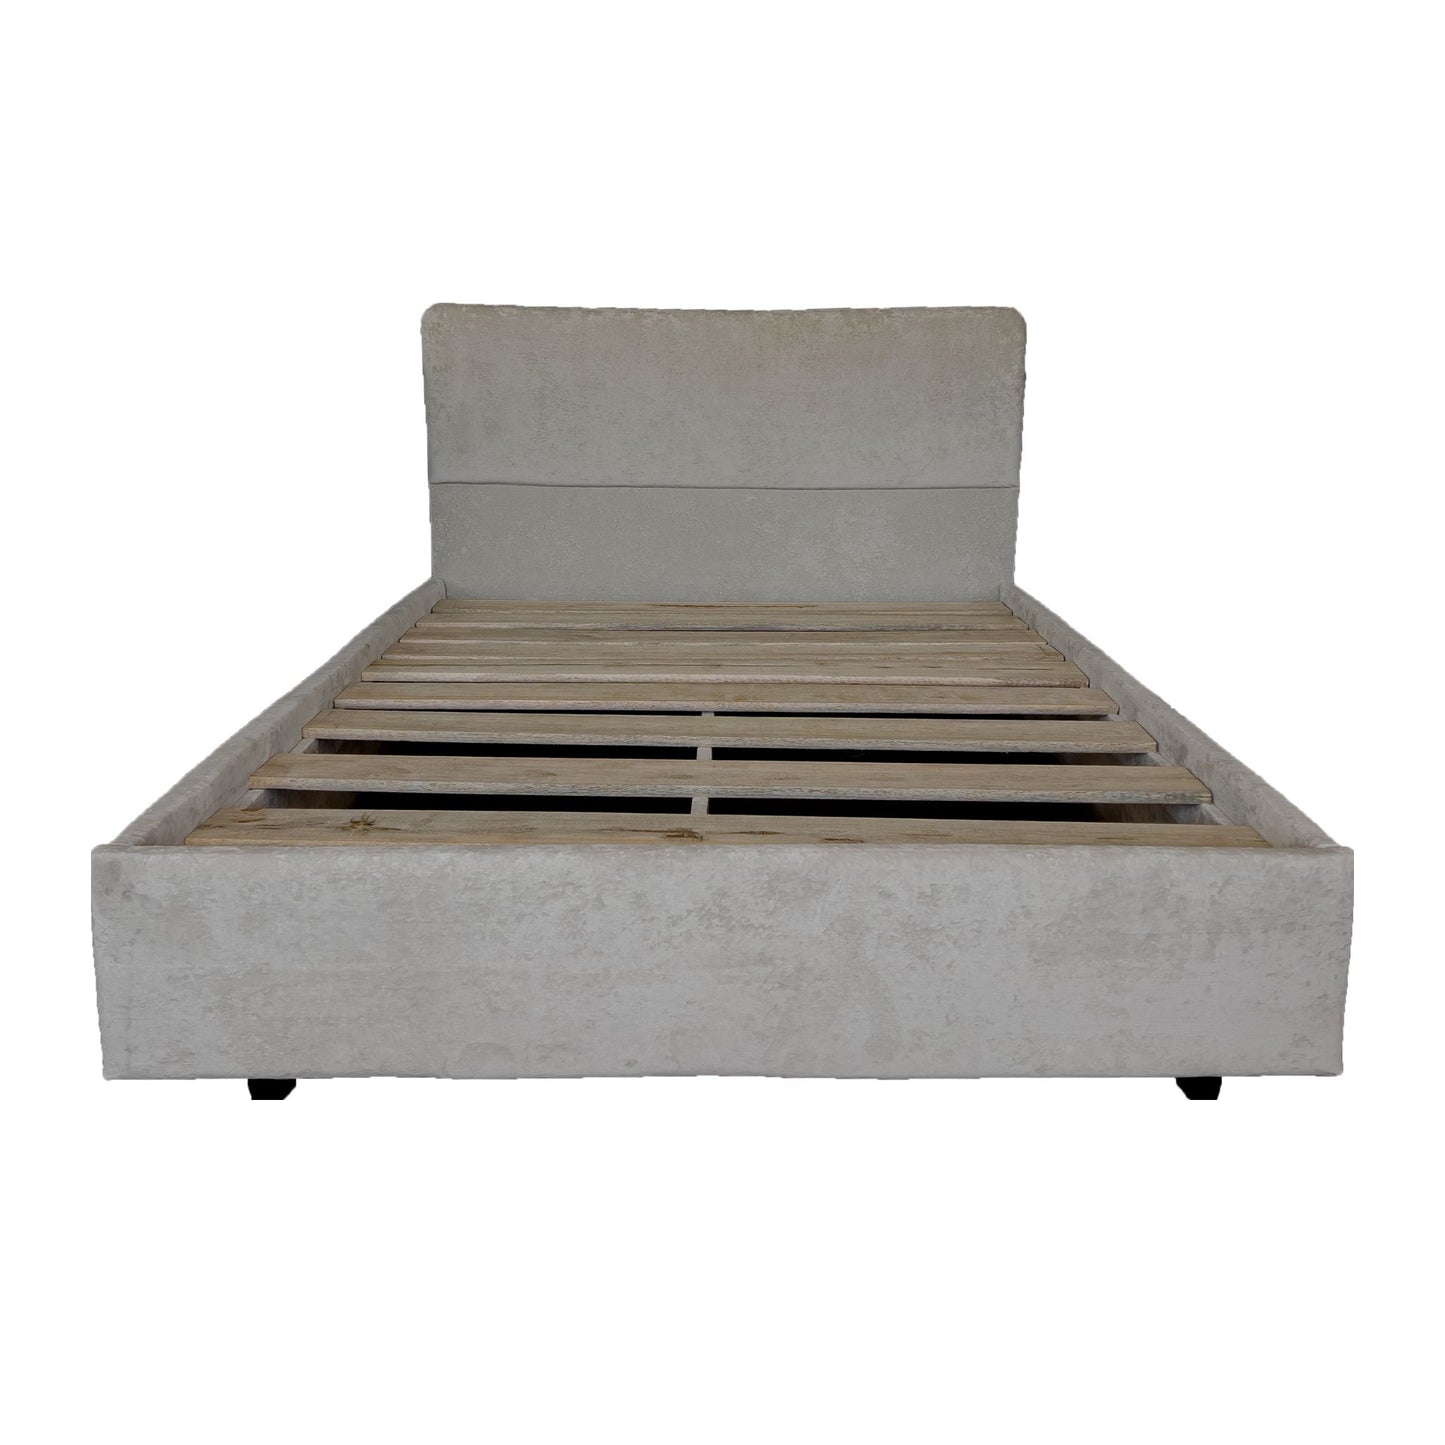 ROMULO Queen Bed Catalaya Marfil